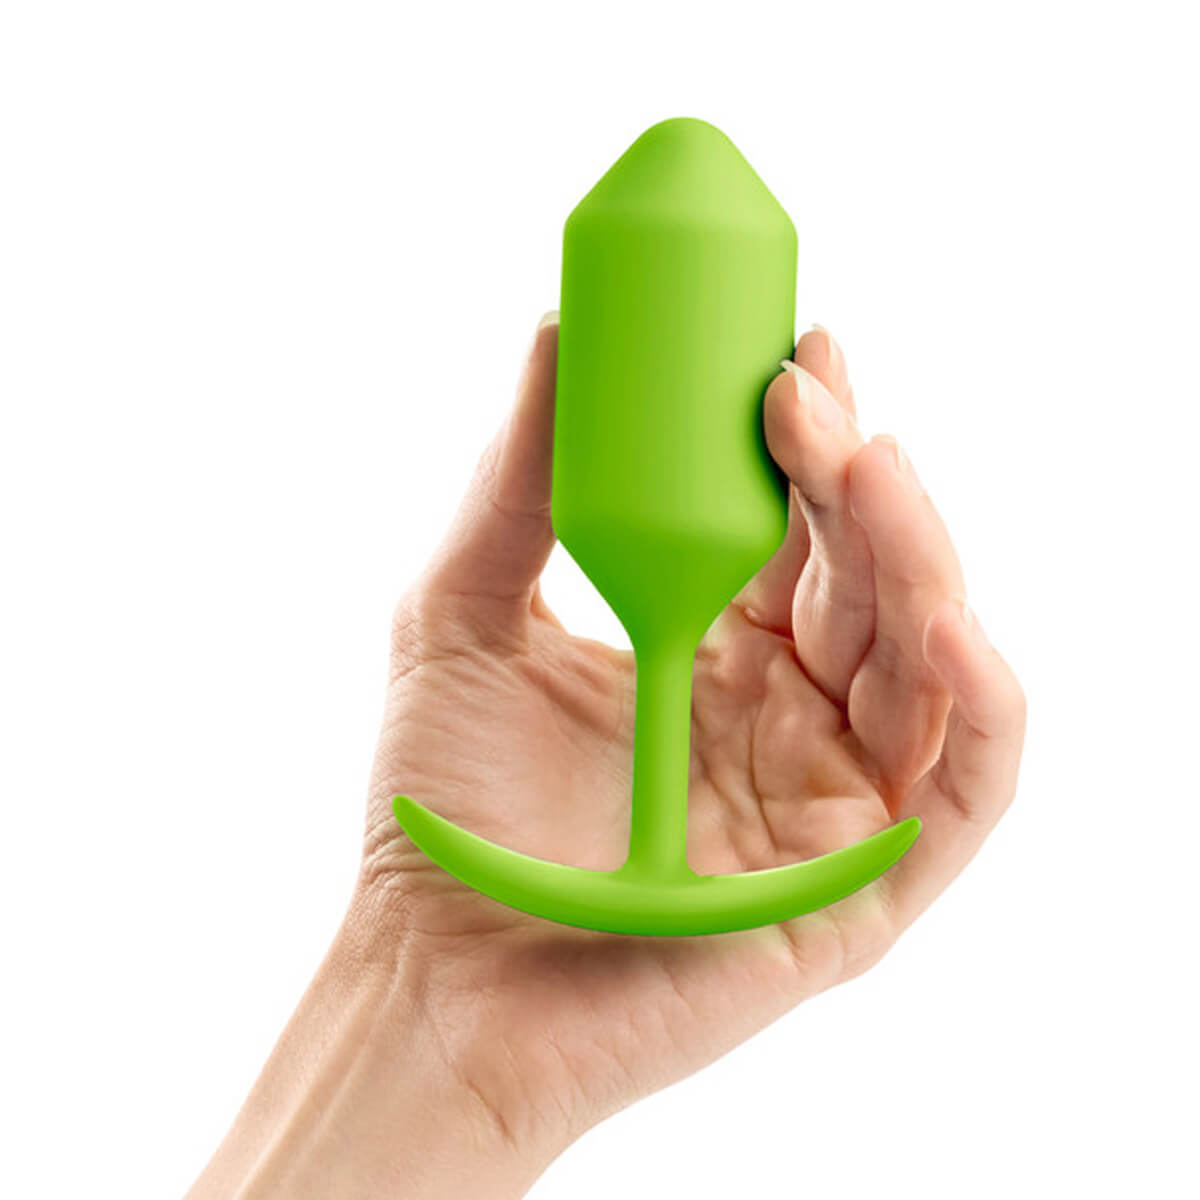 Hand holding a lime green silicone butt plug with torpedo shape Nudie Co